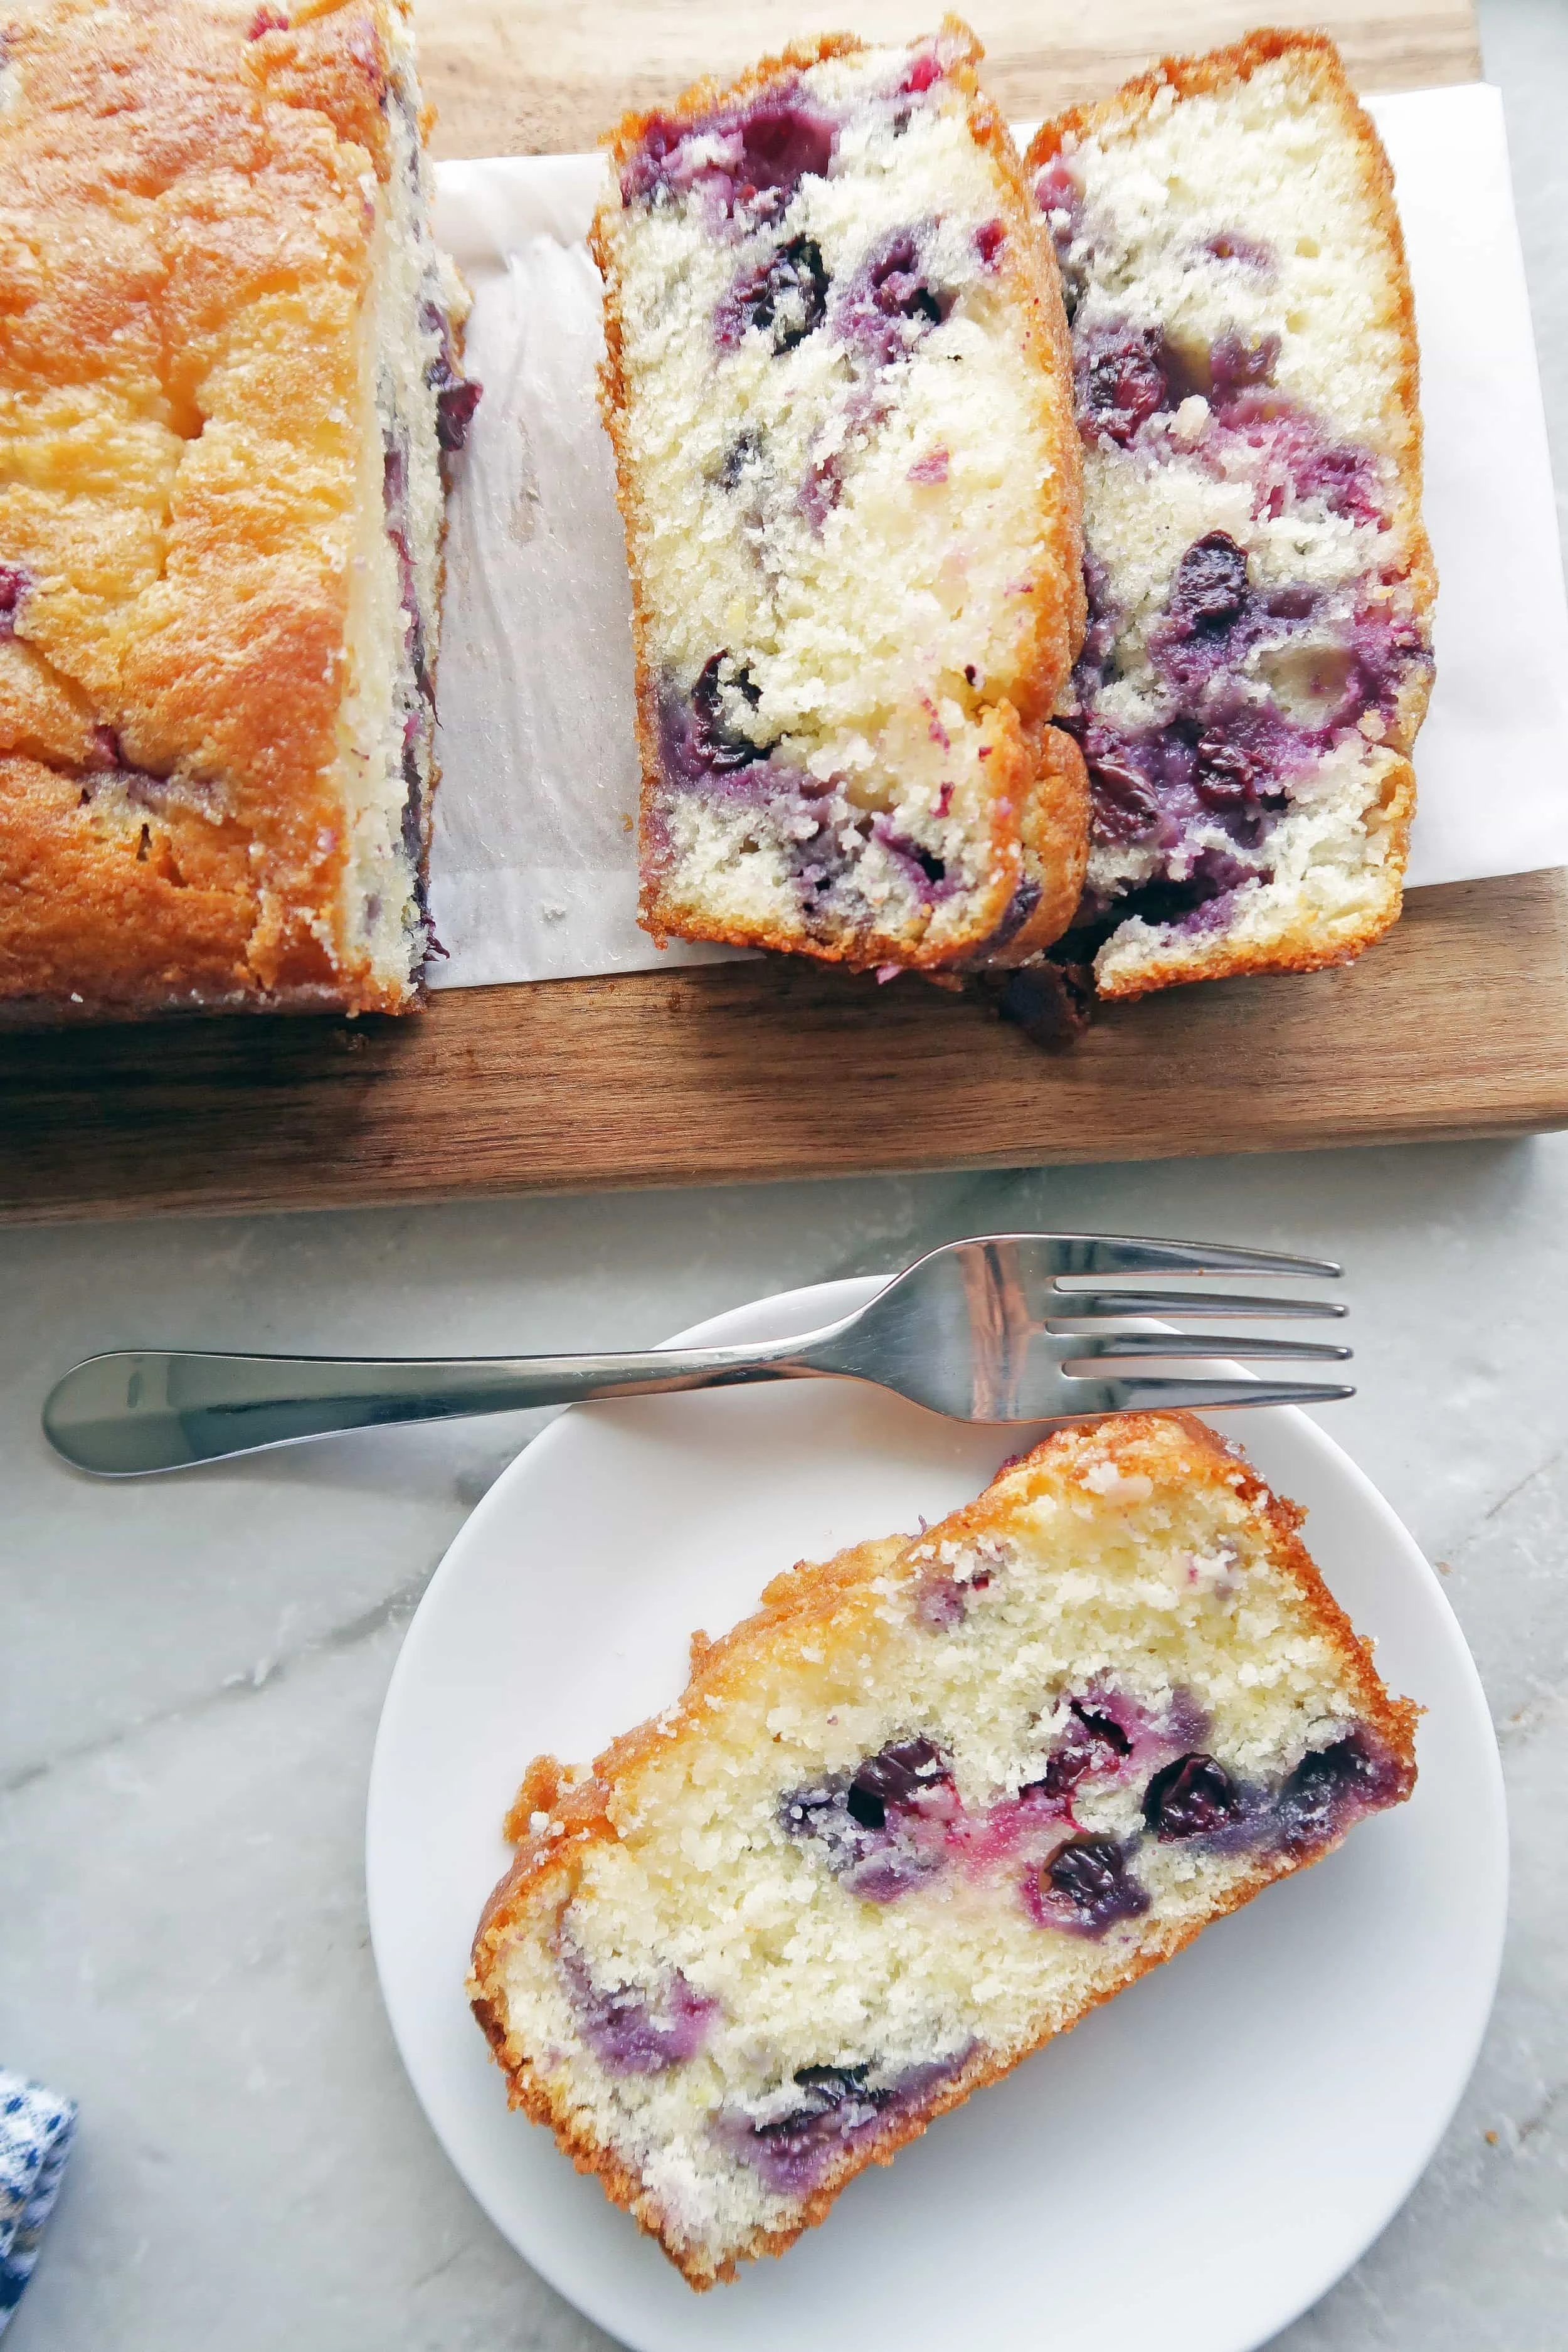 A slice of fluffy Classic Lemon Blueberry Loaf Cake on a white plate; the remaining sliced loaf cake on a long wooden board beside it.